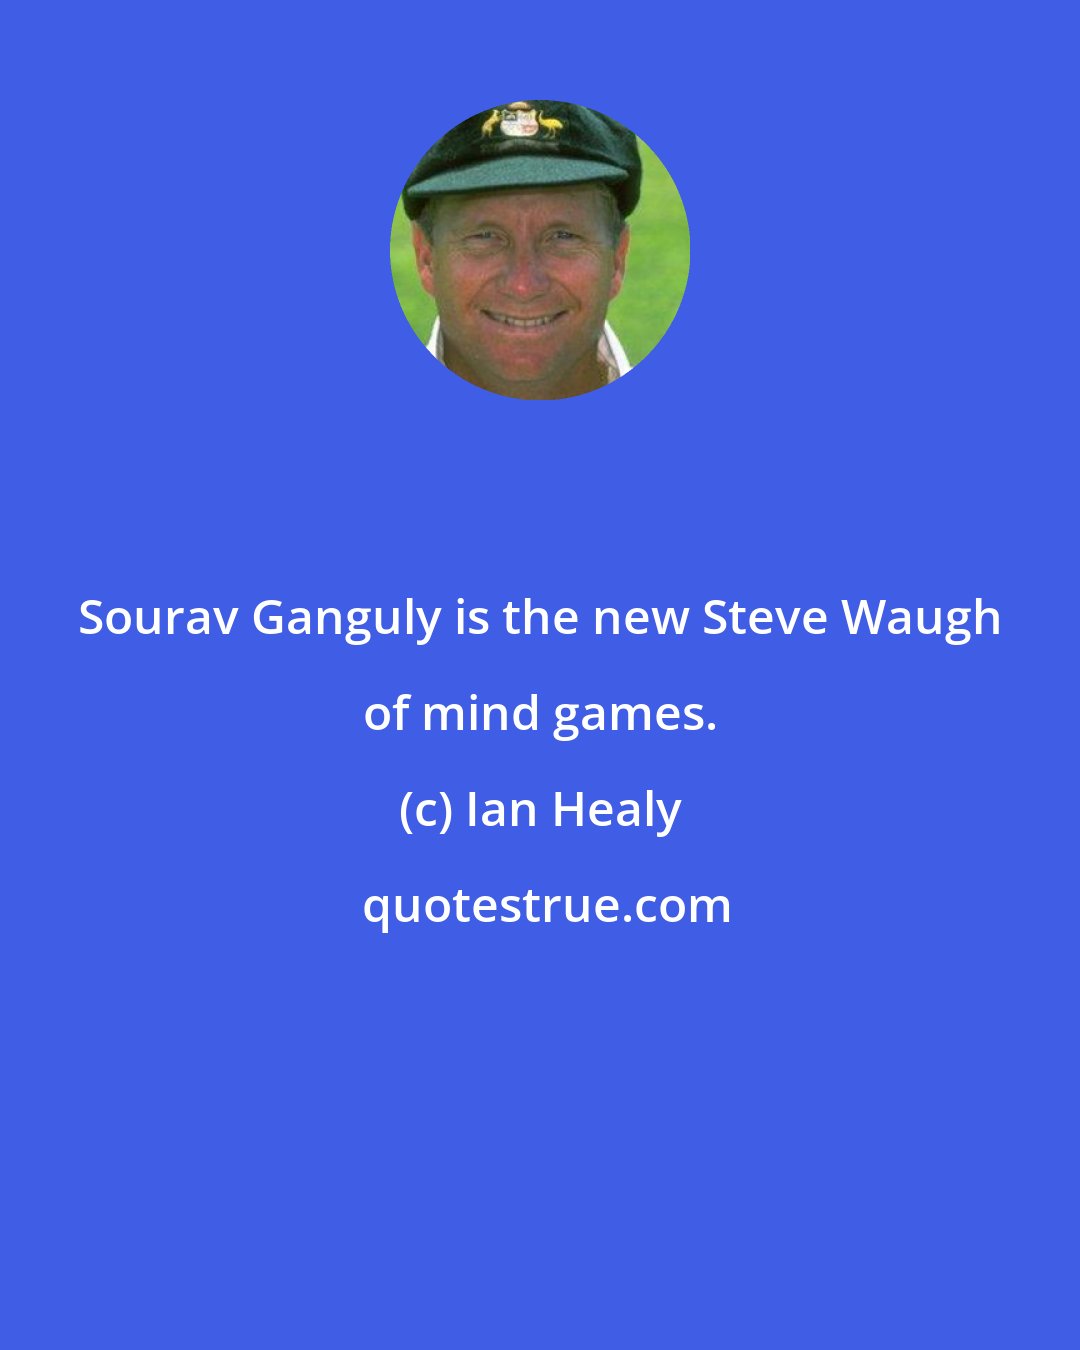 Ian Healy: Sourav Ganguly is the new Steve Waugh of mind games.